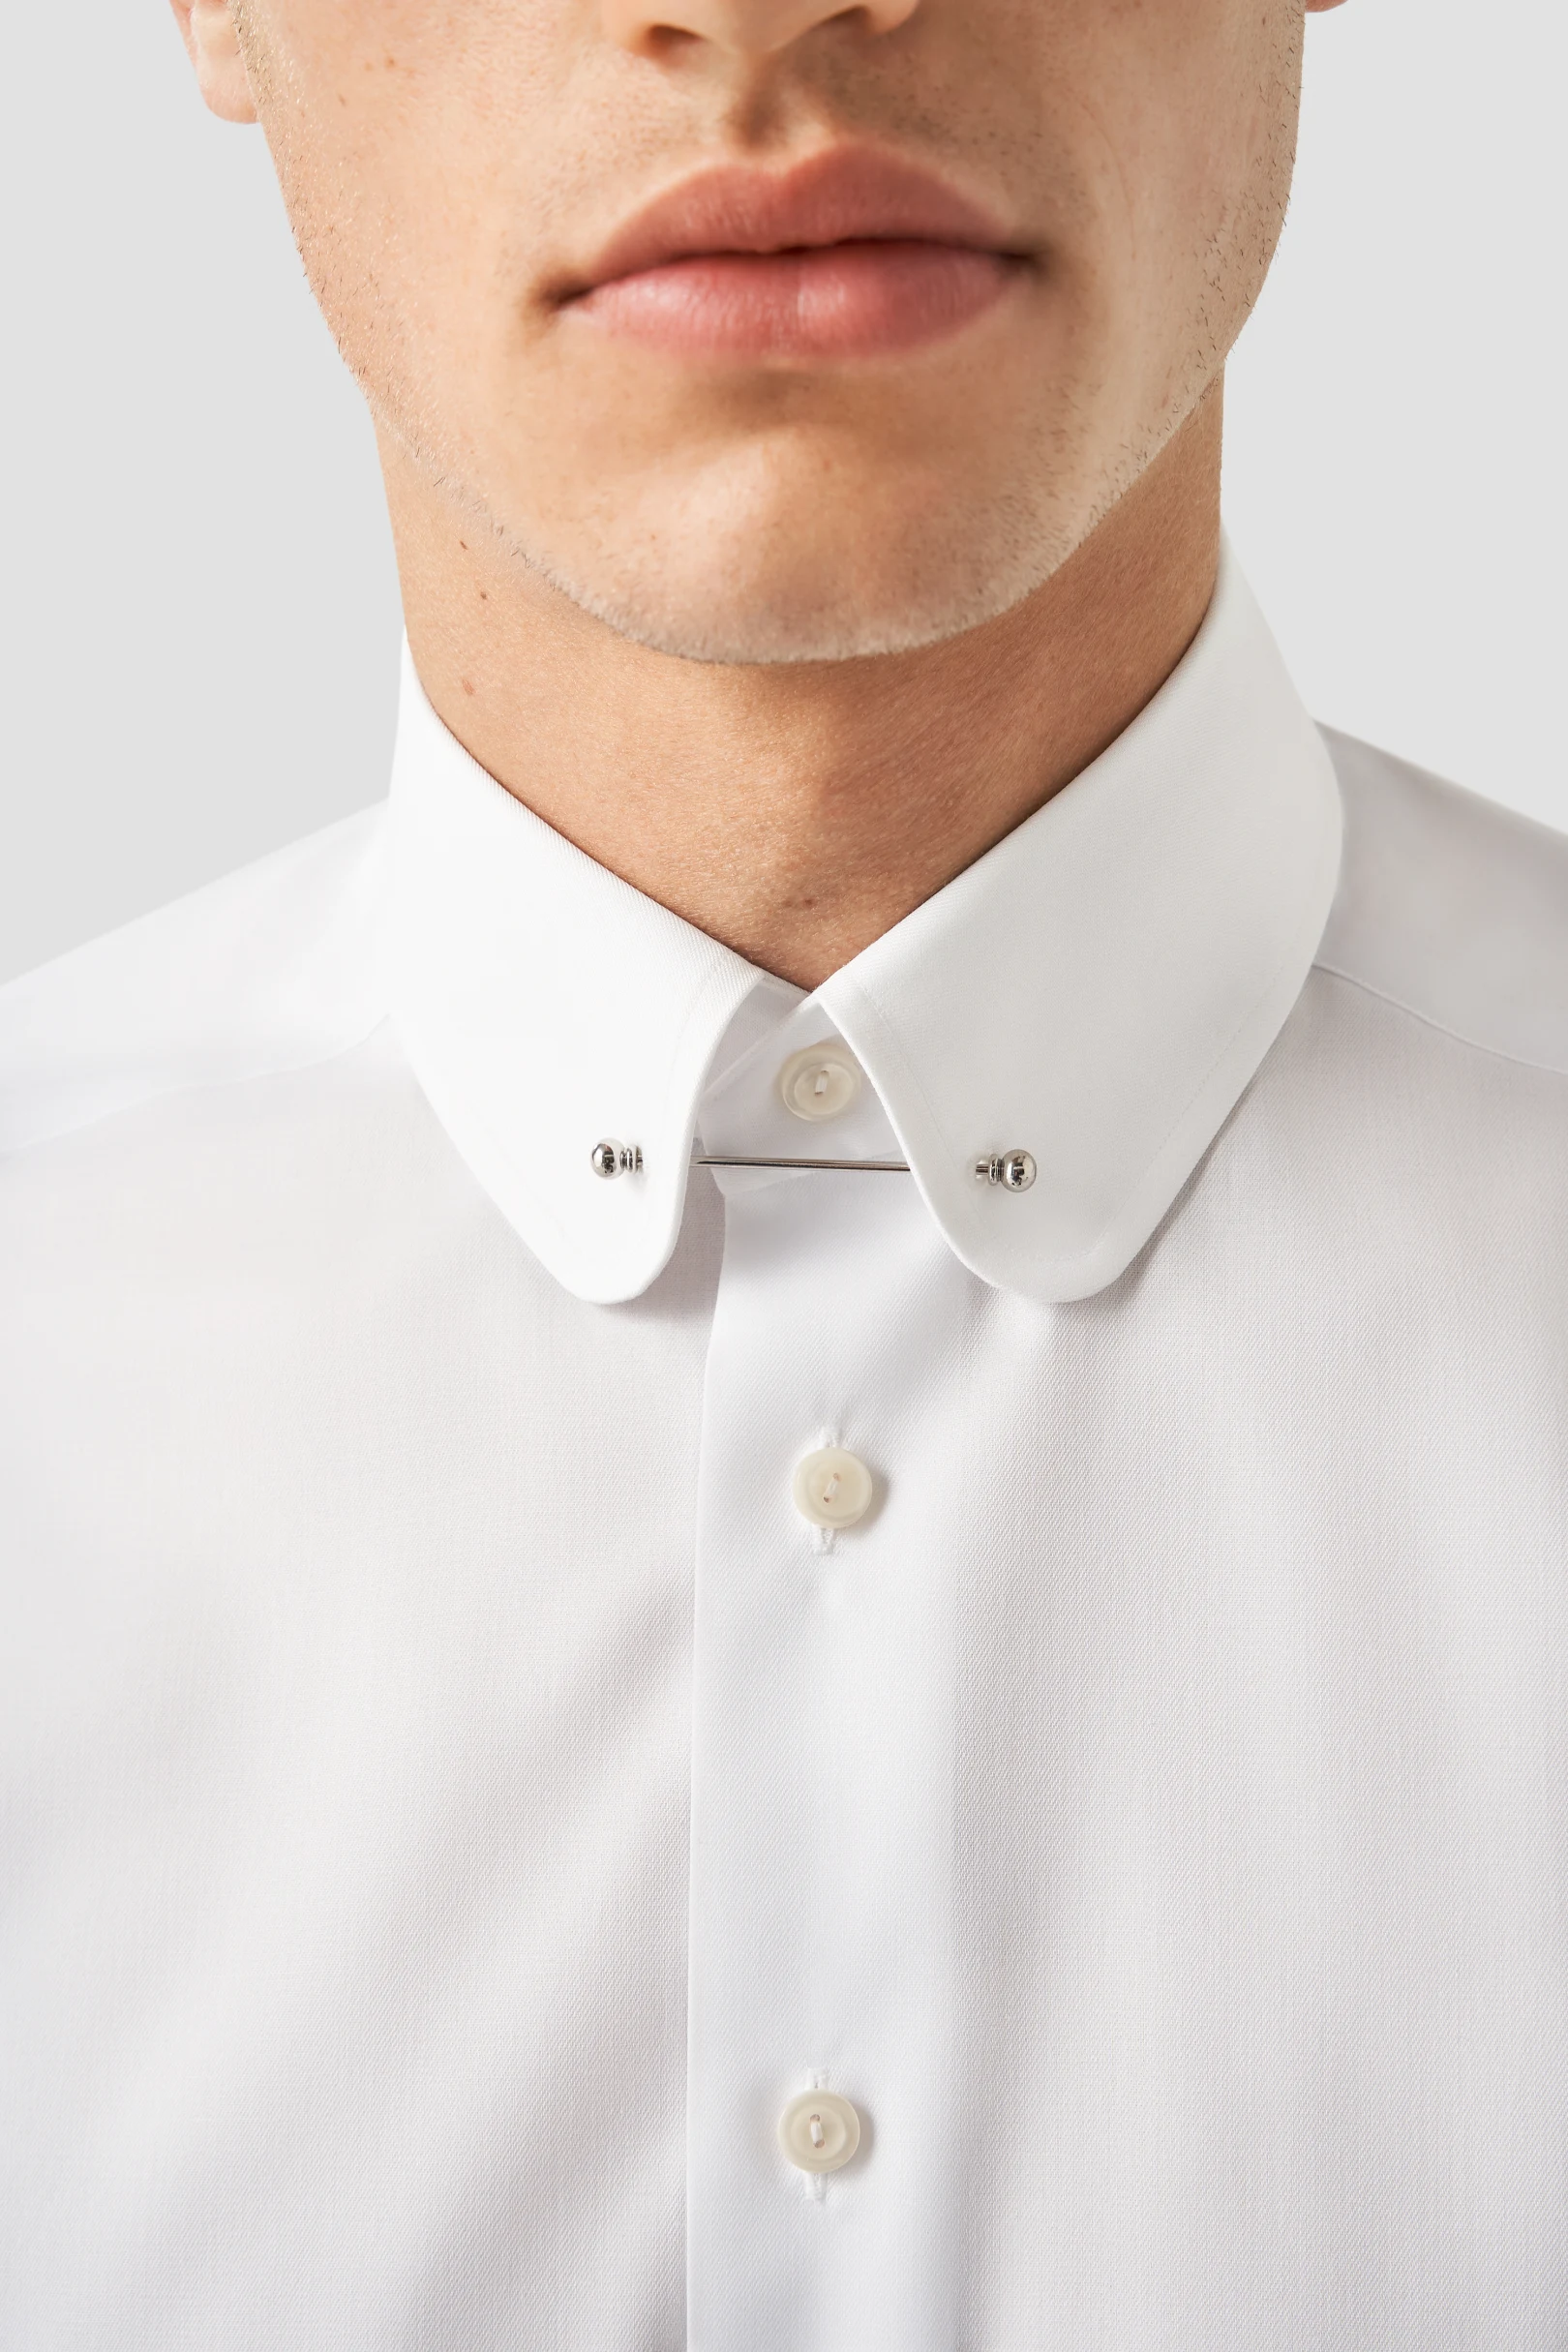 Rounded pin collar 